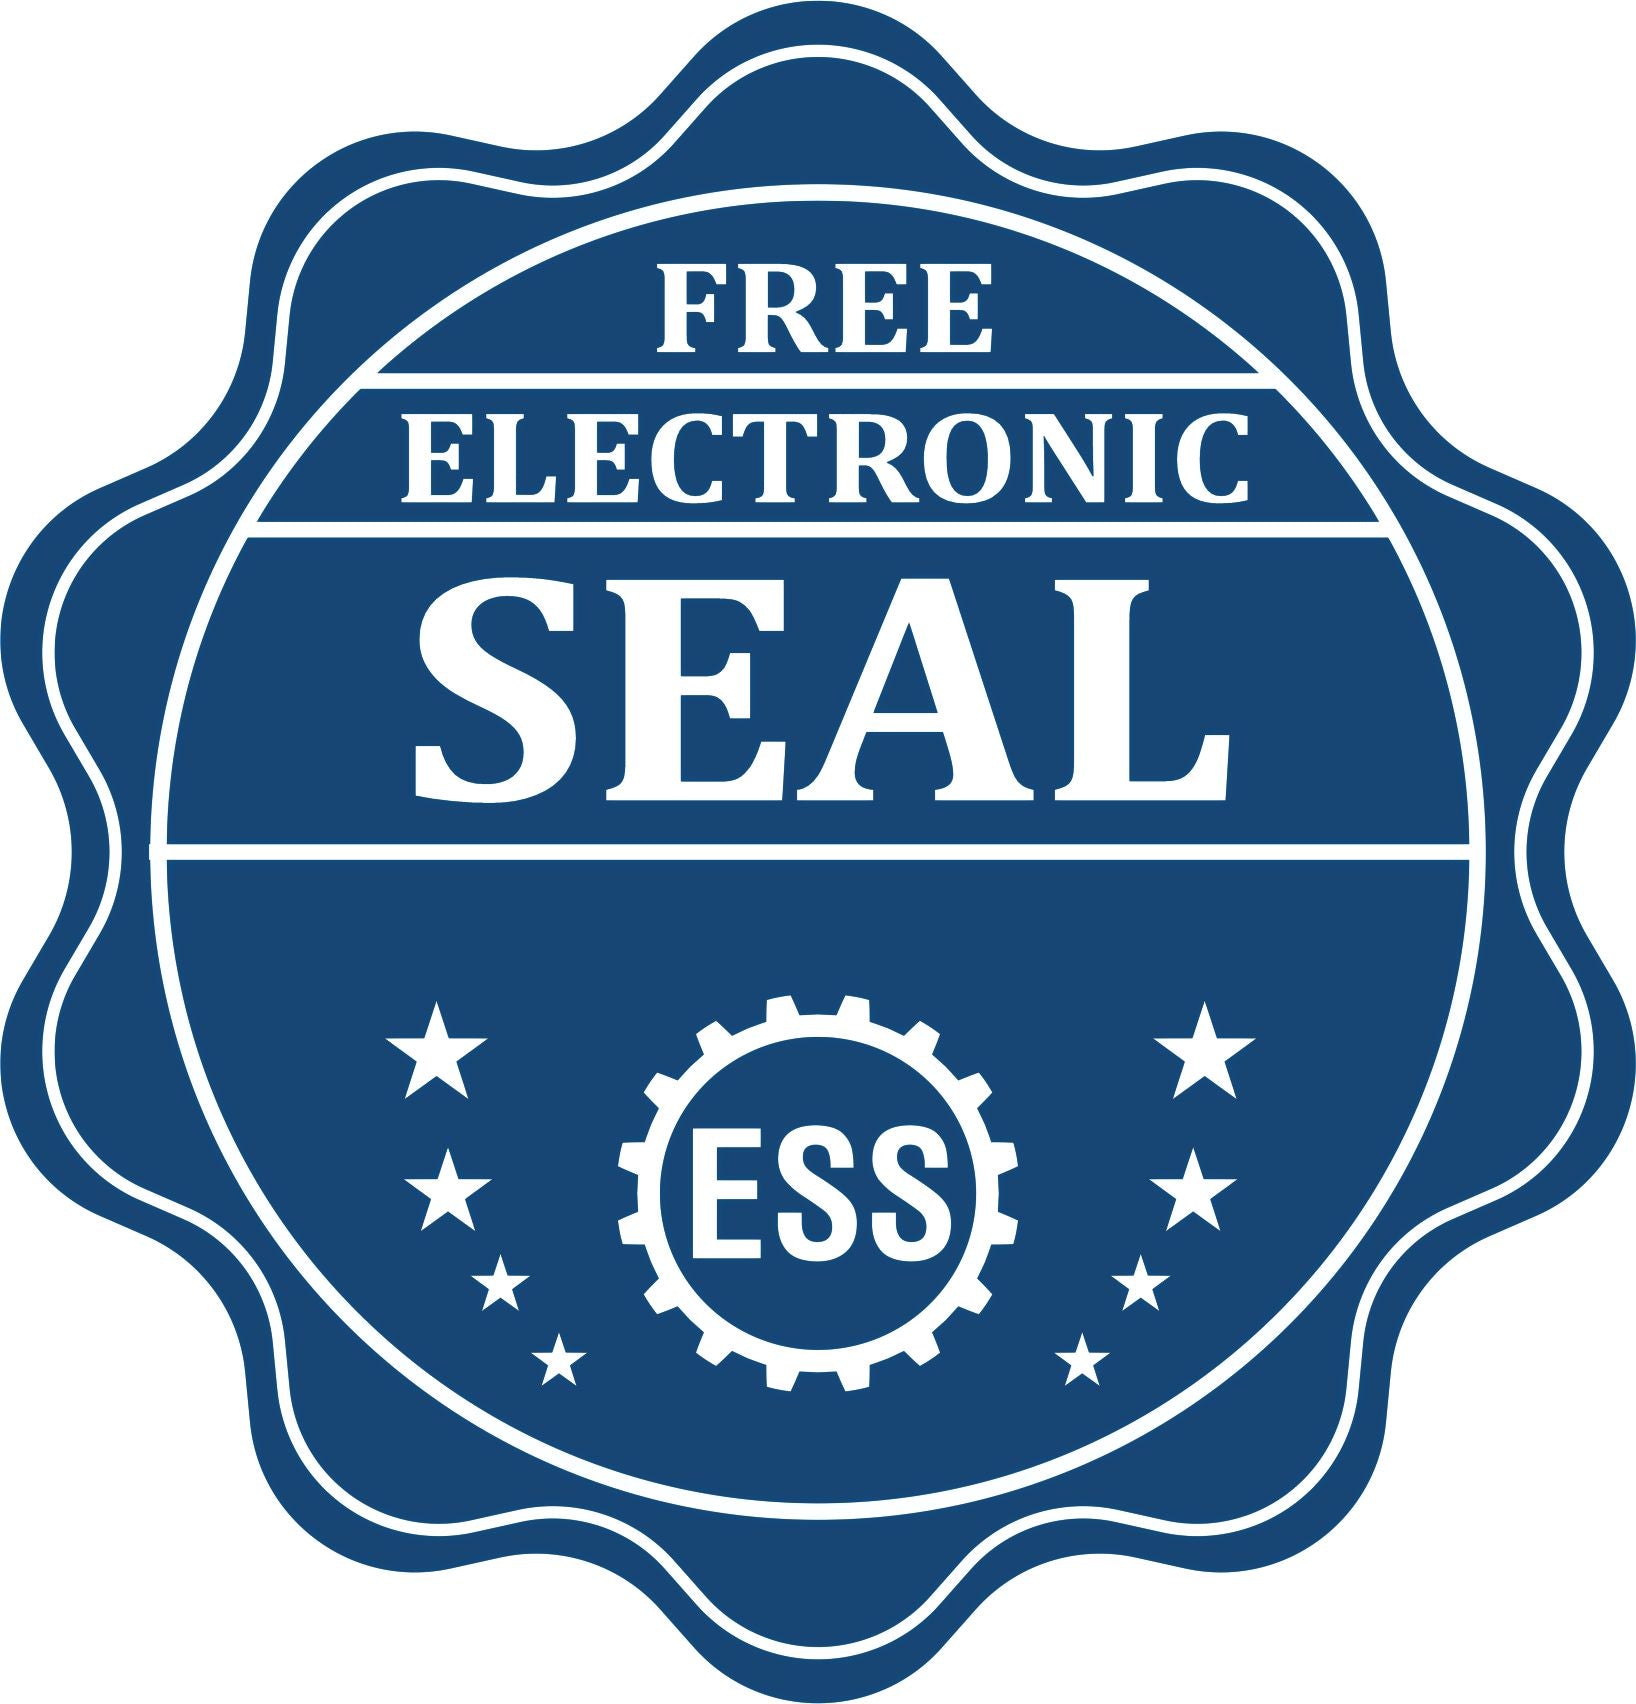 A badge showing a free electronic seal for the Extended Long Reach Maine Surveyor Embosser with stars and the ESS gear on the emblem.